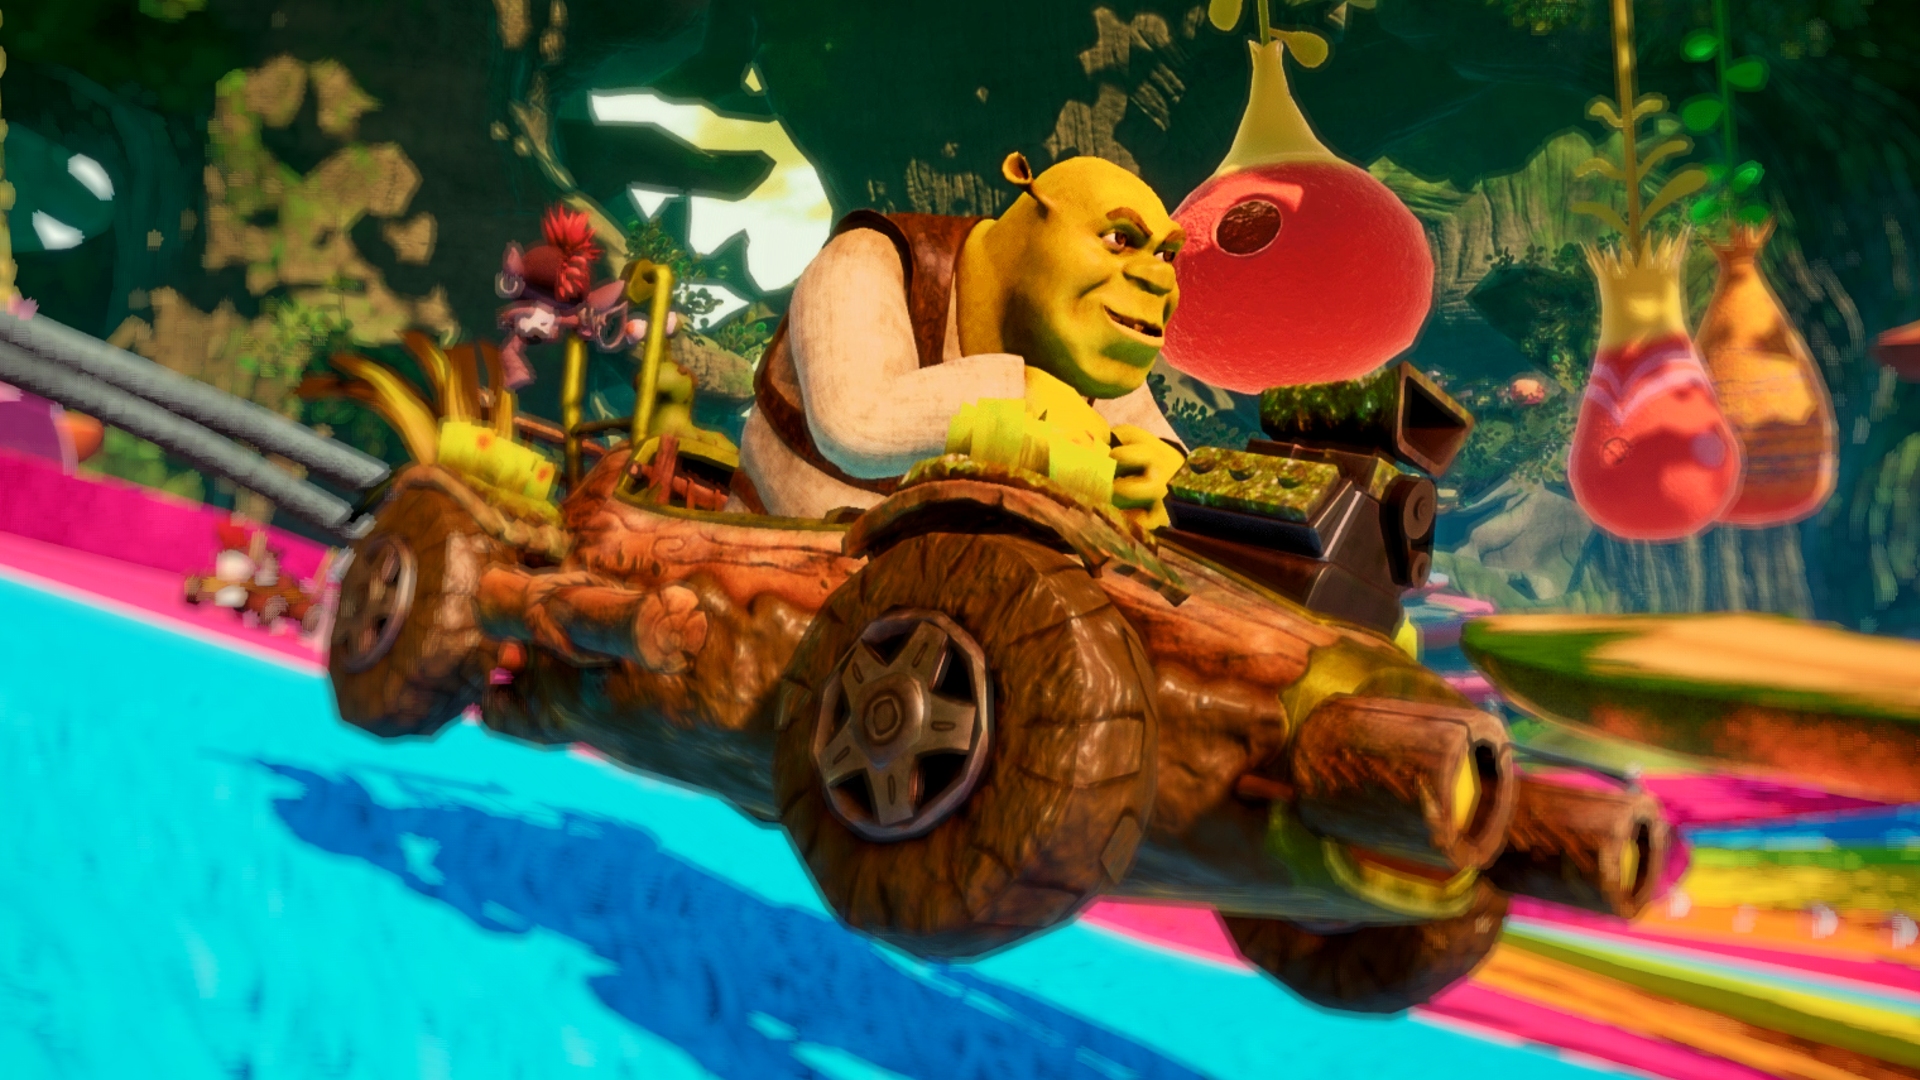 Shrek is back and better than ever in an ogre-ly exciting racing game